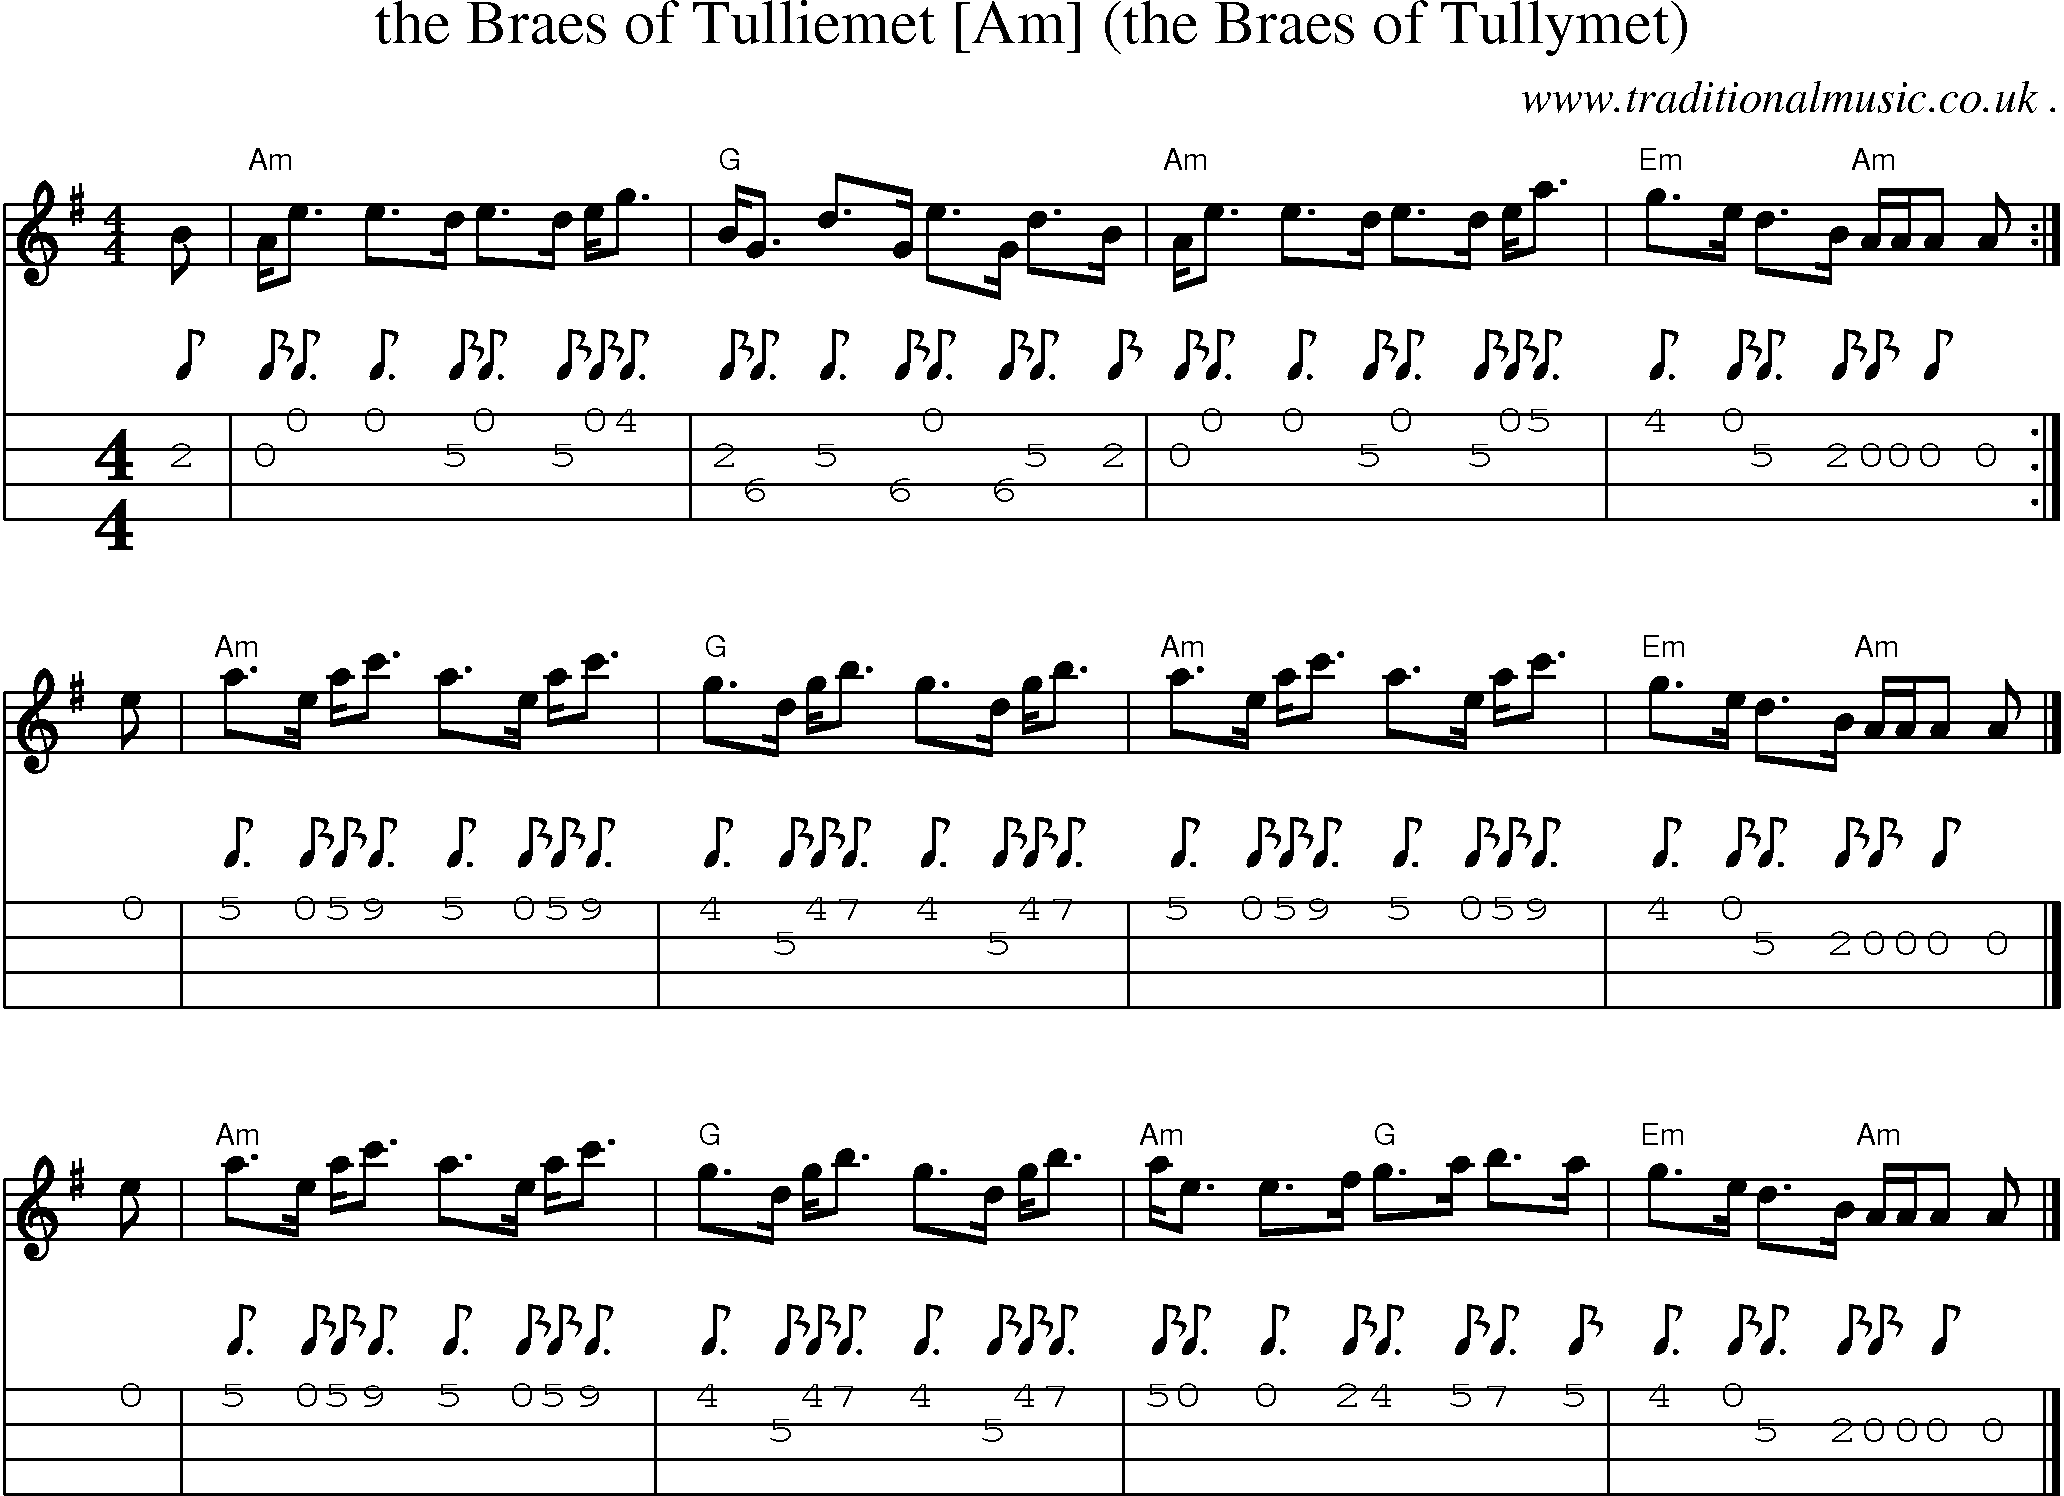 Sheet-music  score, Chords and Mandolin Tabs for The Braes Of Tulliemet [am] The Braes Of Tullymet